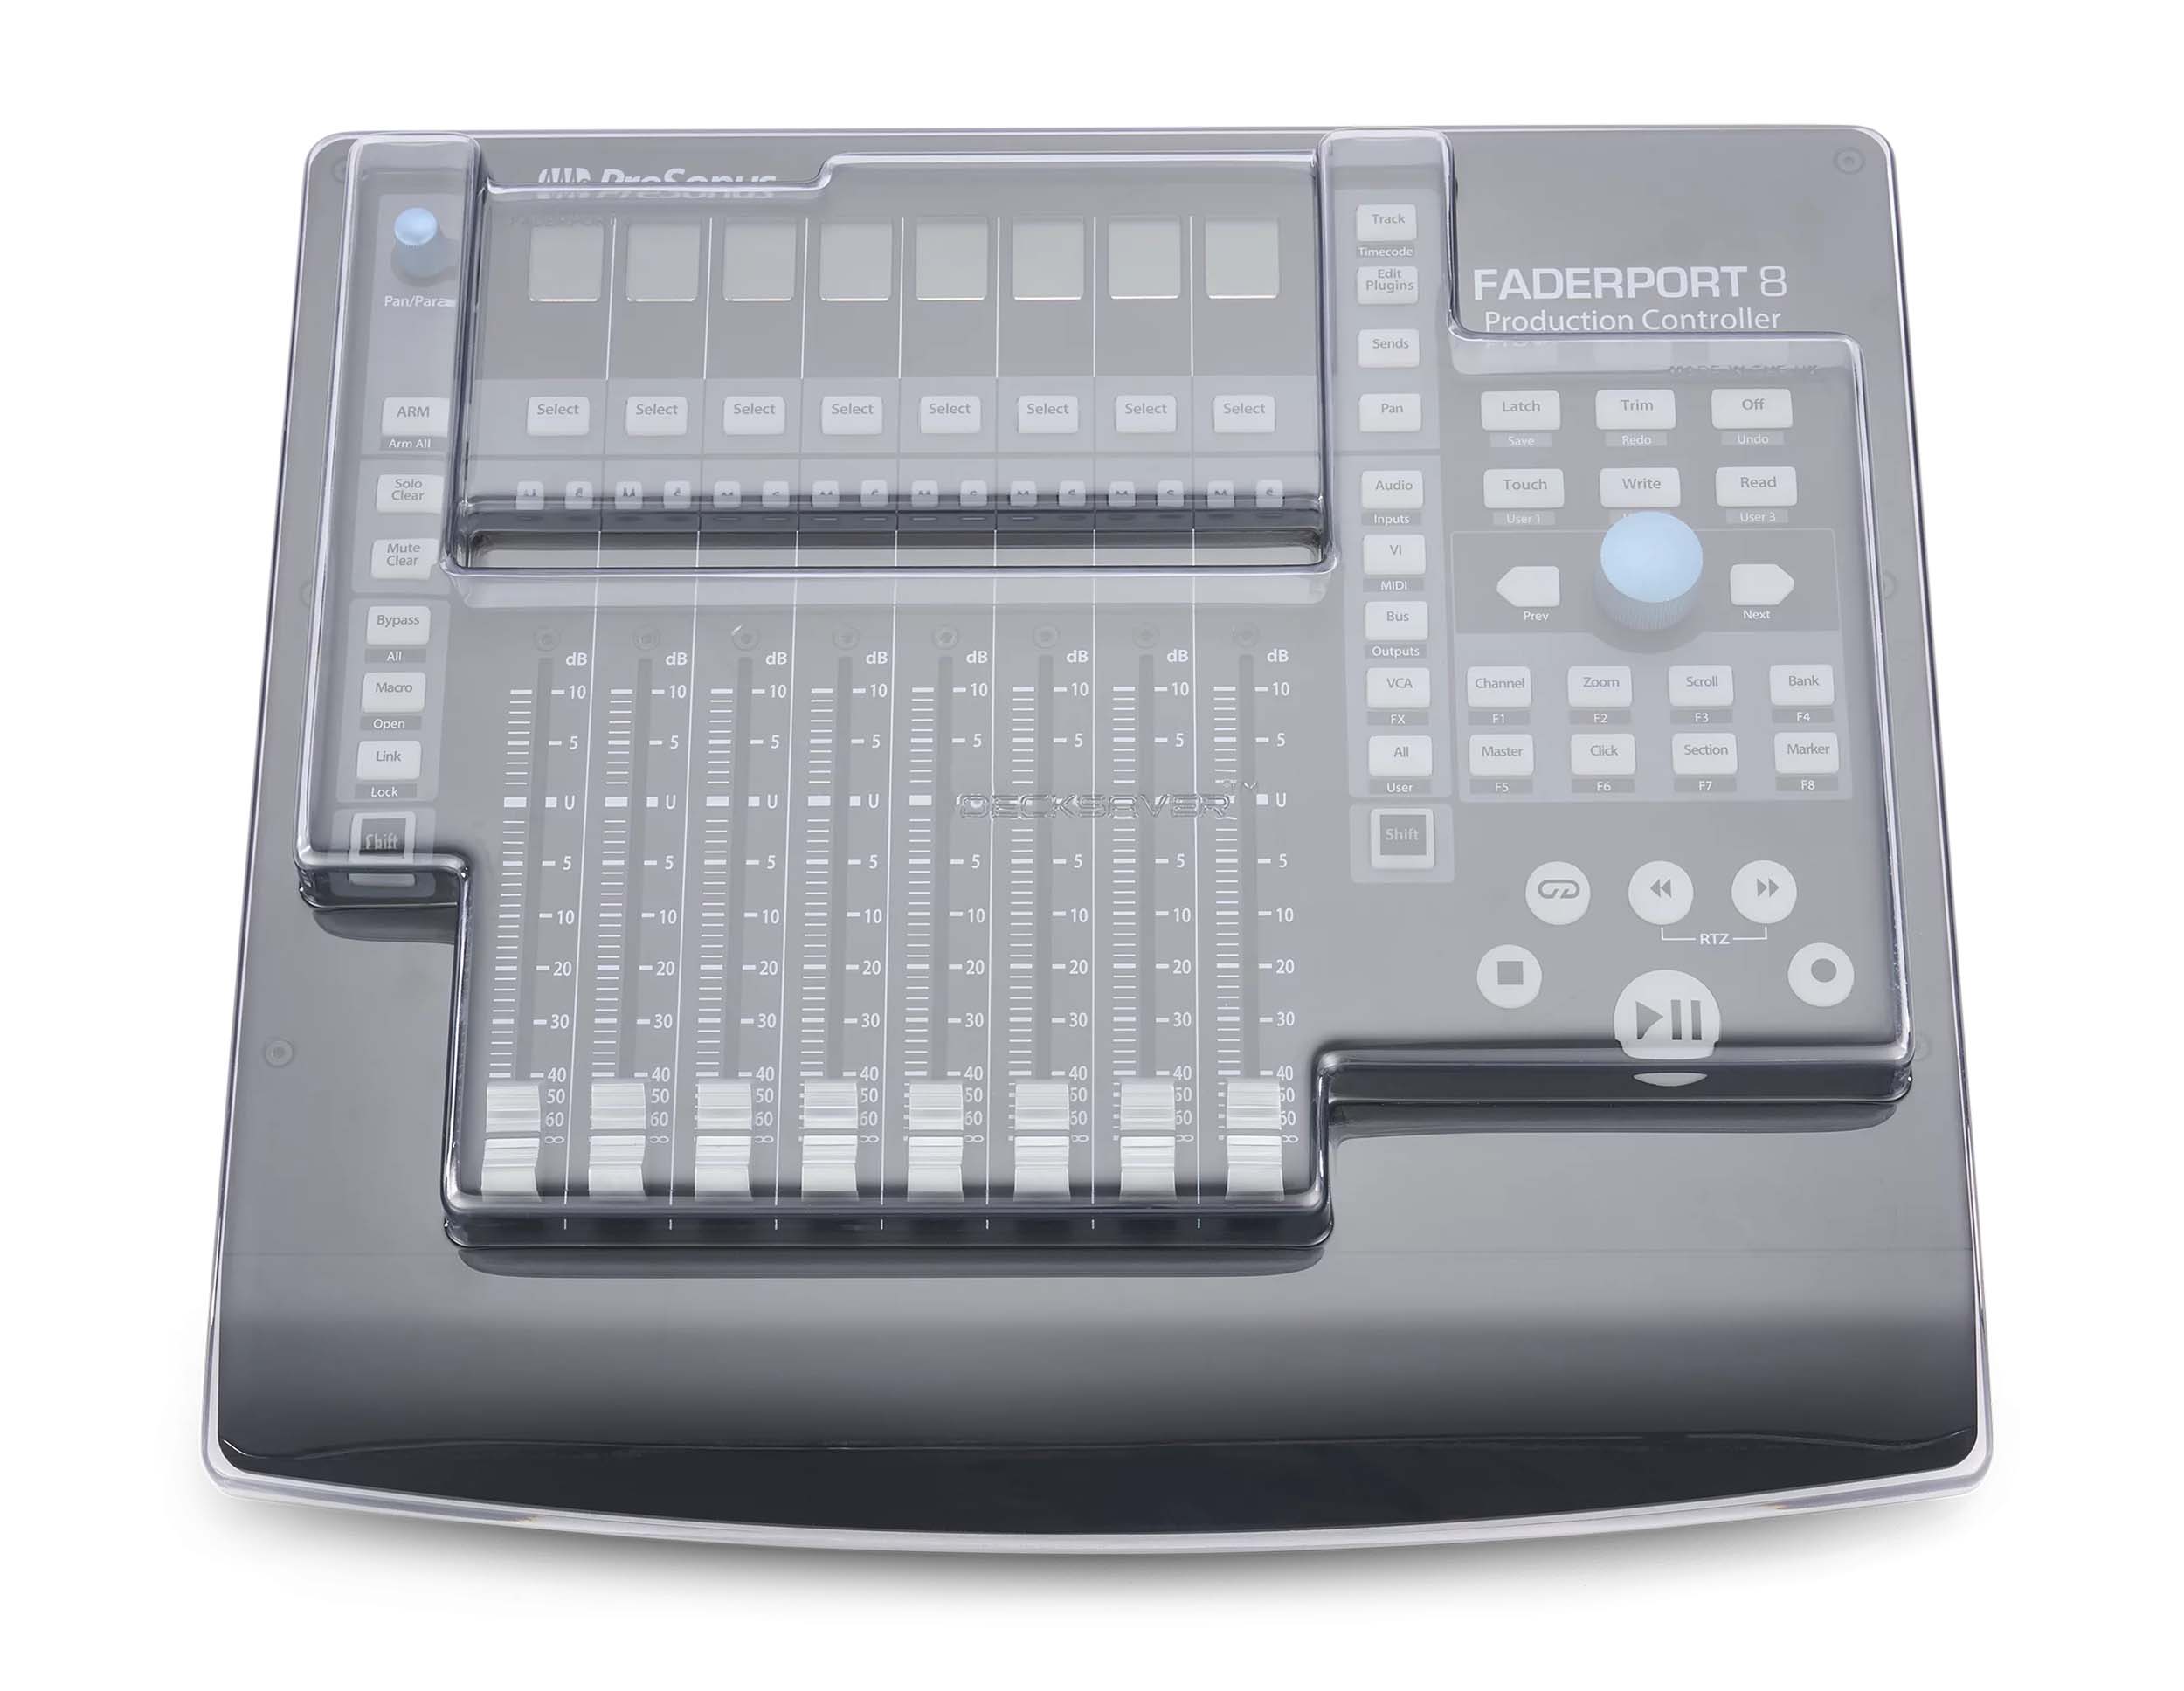 Decksaver DS-PC-FADERPORT, Protection Cover for Presonus FaderPort Production Controller by DECKSAVER